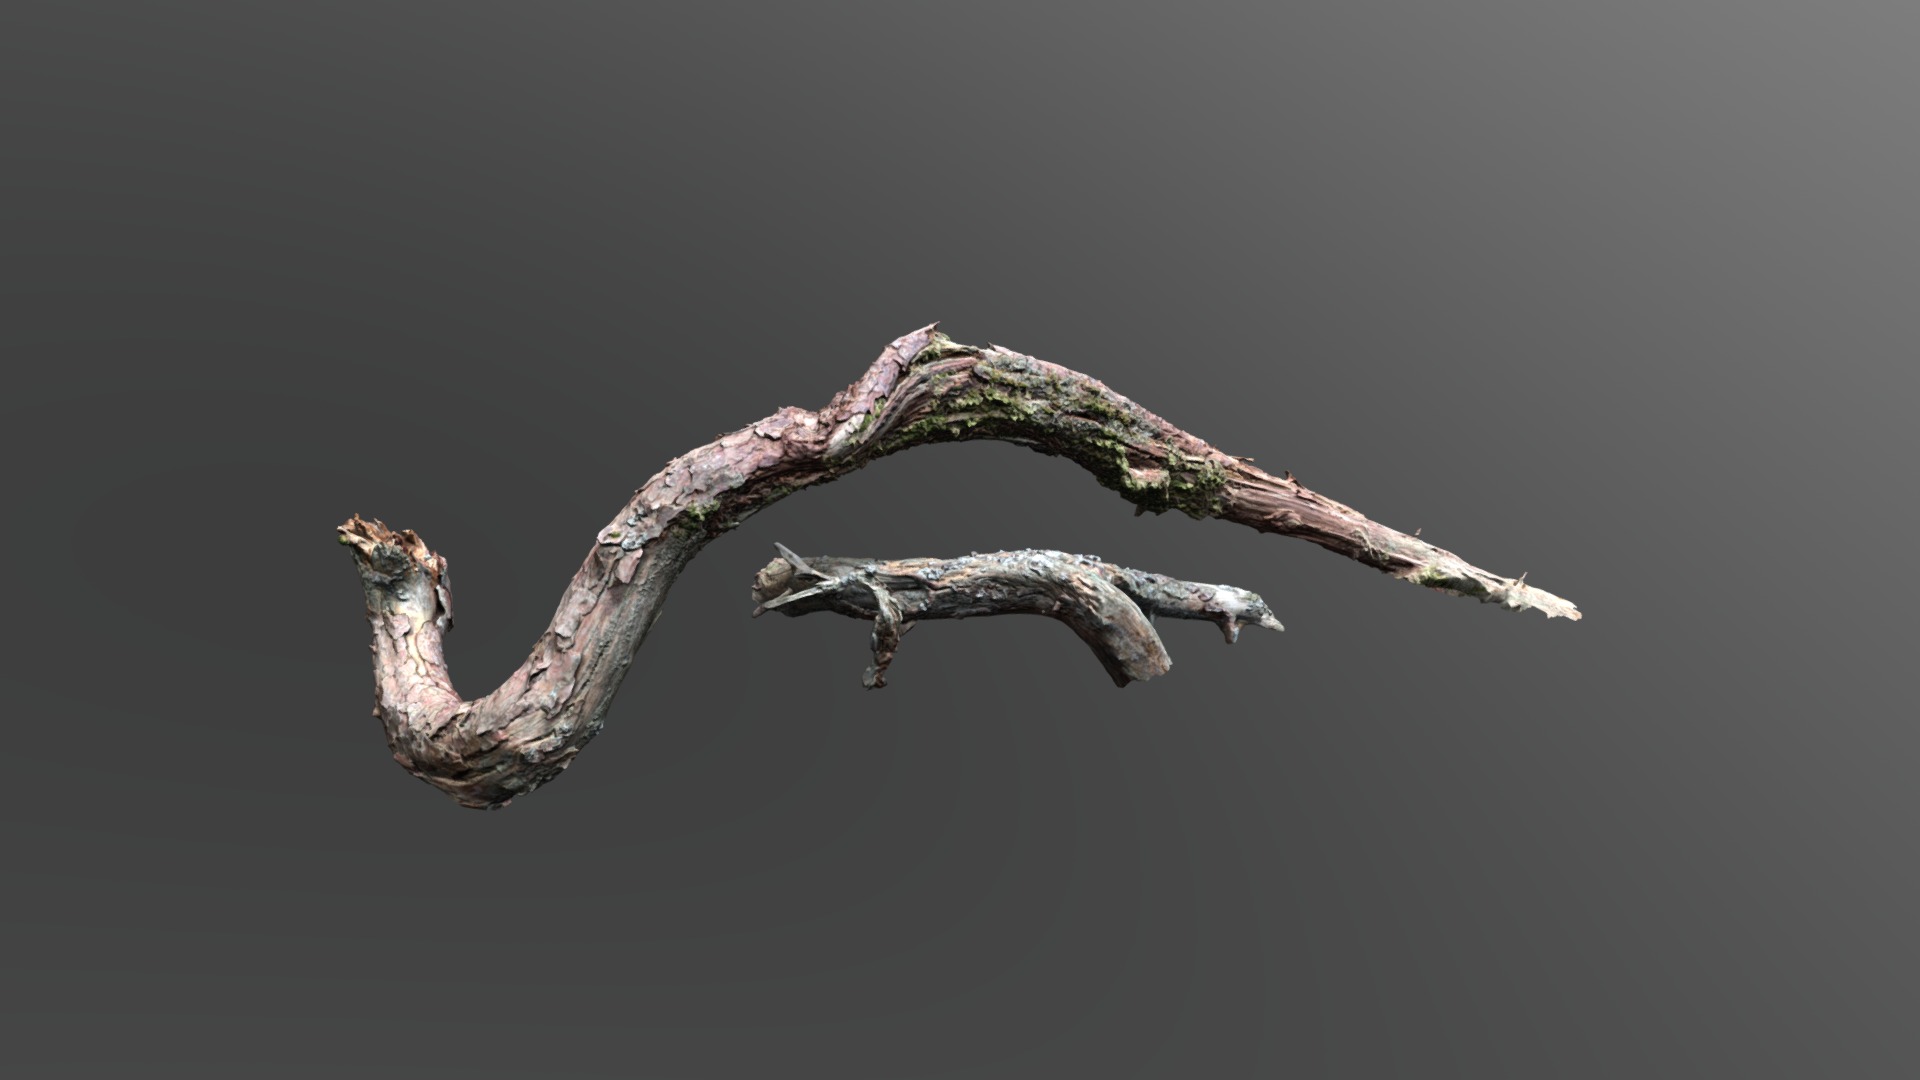 3D model 3D Scan Nature Asset 0005 - This is a 3D model of the 3D Scan Nature Asset 0005. The 3D model is about a branch with ice on it.